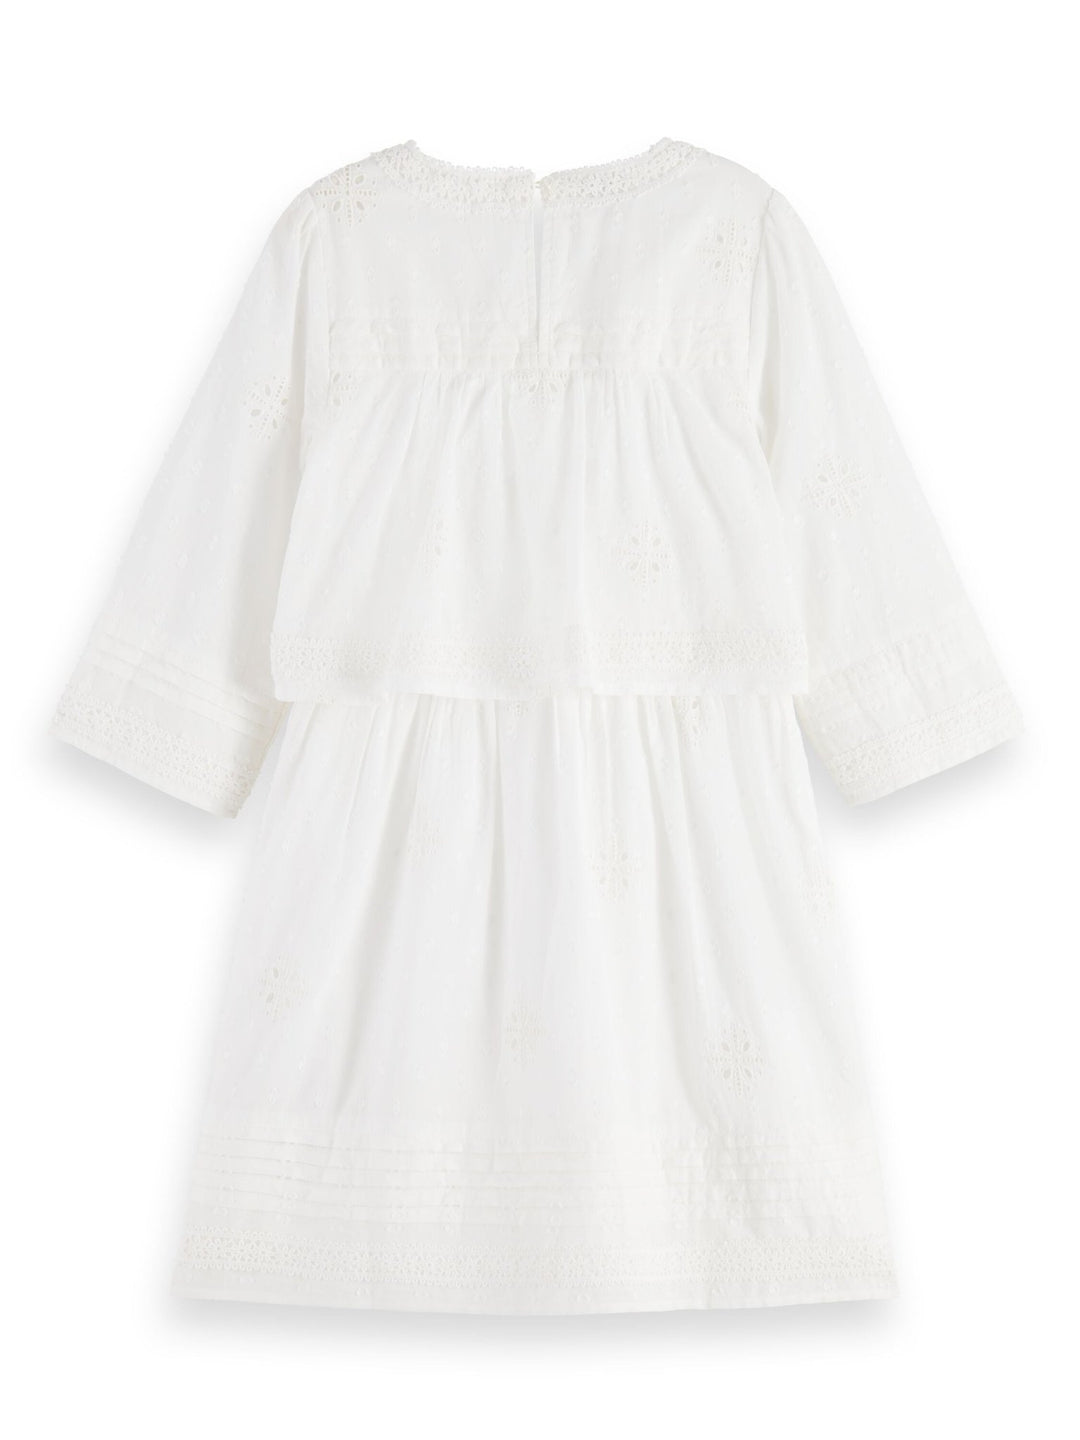 Broderie Anglaise 3/4 Sleeve Dress - Off White - Posh New York